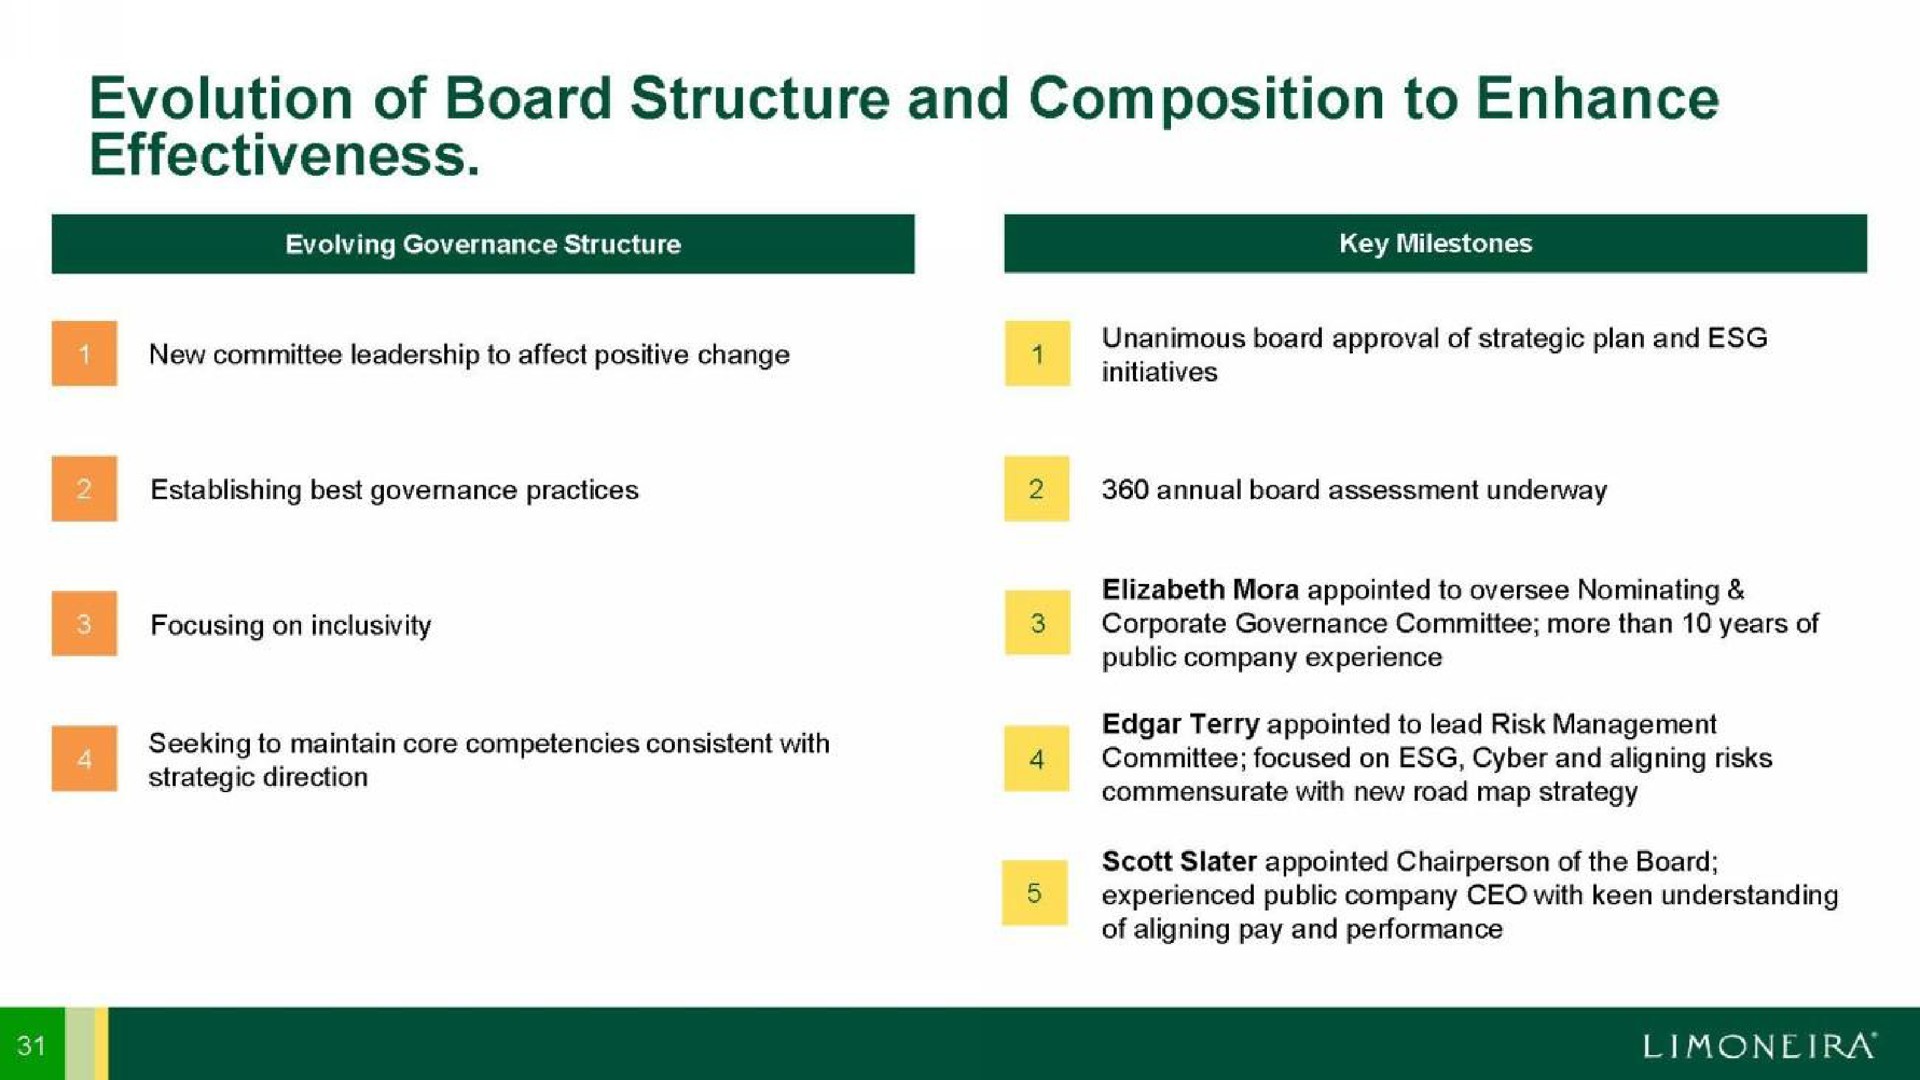 evolution of board structure and composition to enhance effectiveness | Limoneira